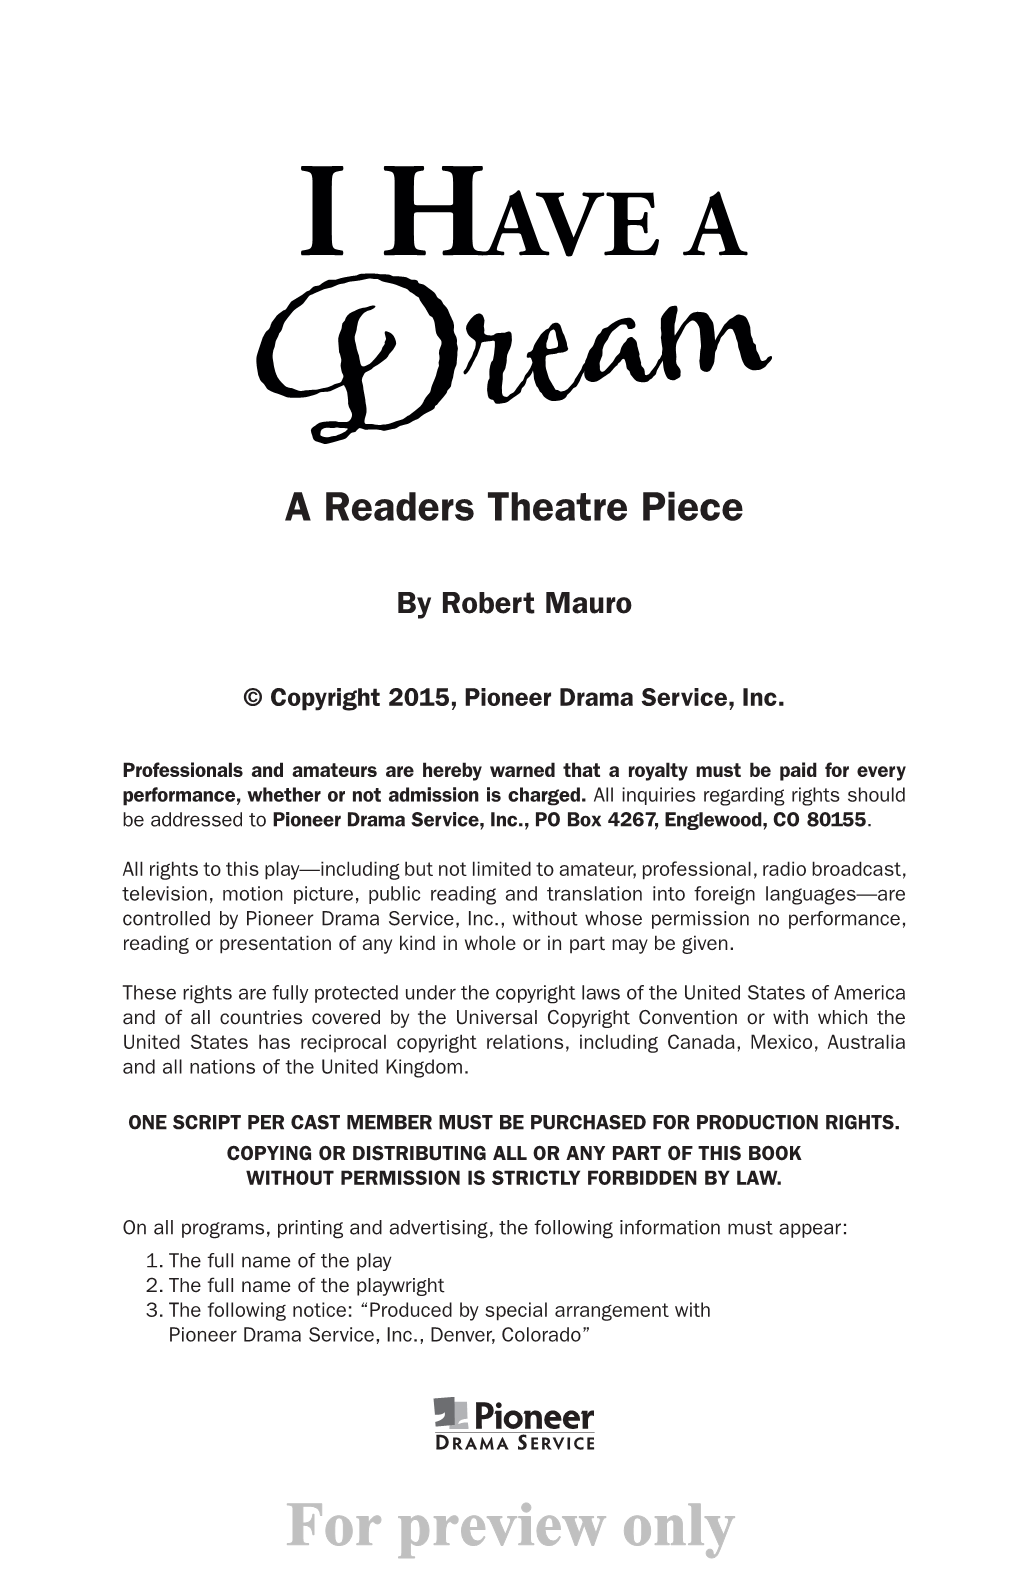 For Preview Only I HAVE a DREAM a Readers Theatre Piece